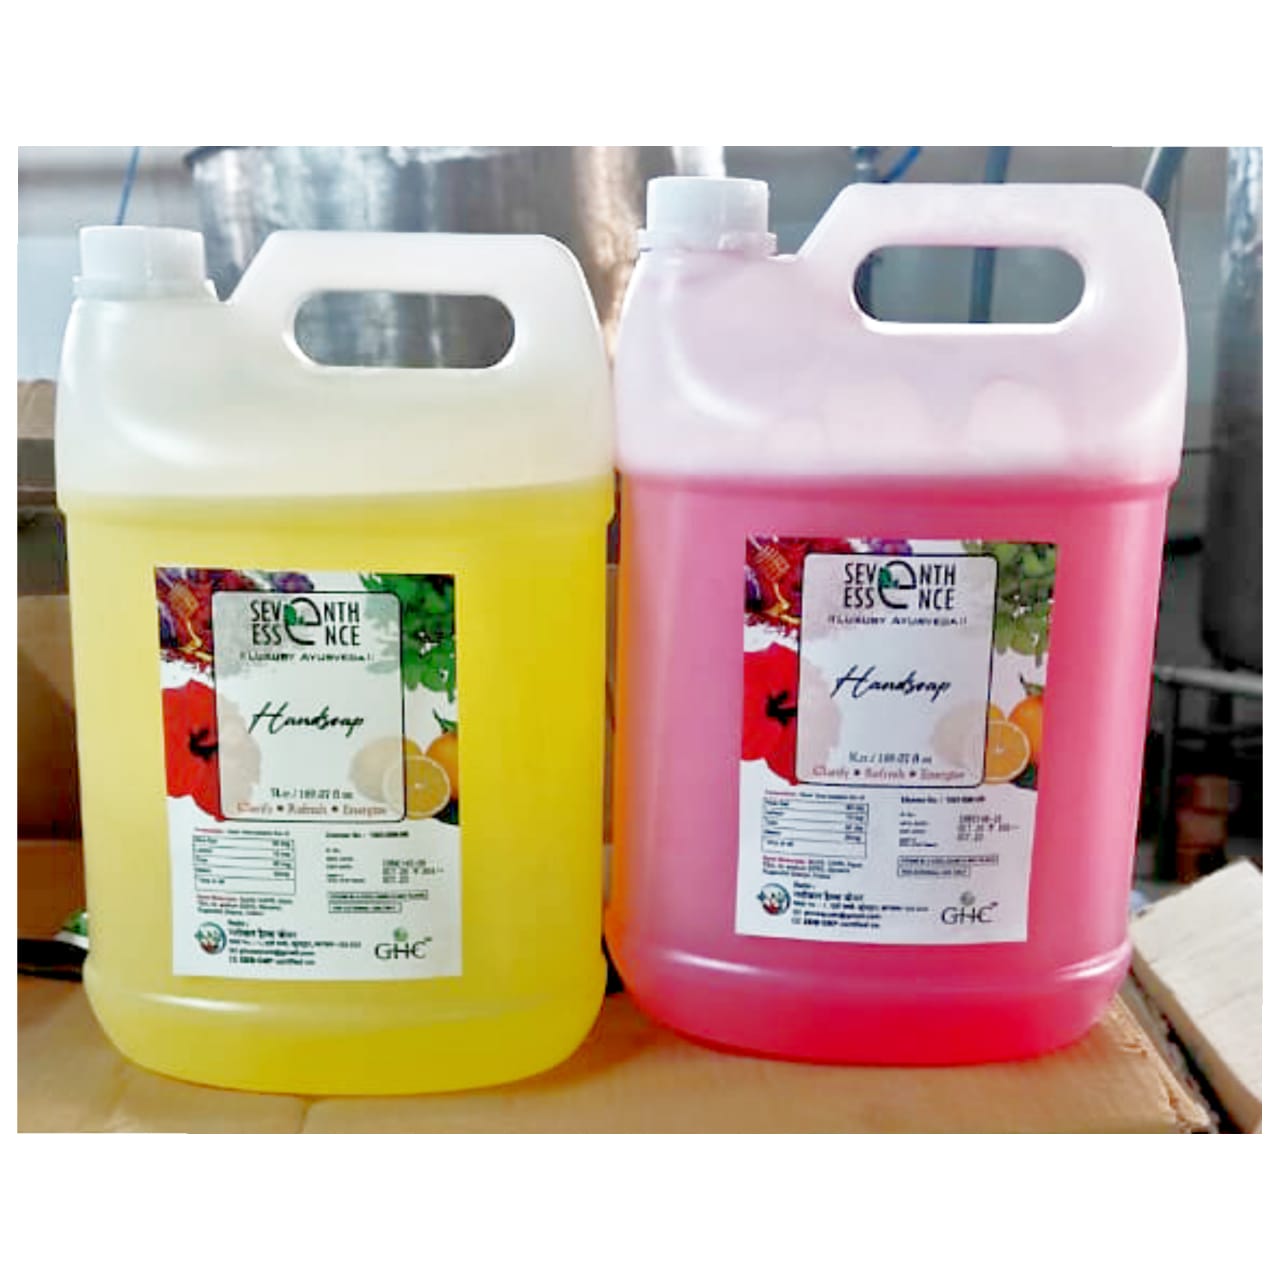 SEVENTH ESSENCE Hand Wash (5Ltr) from Jackpot Durables